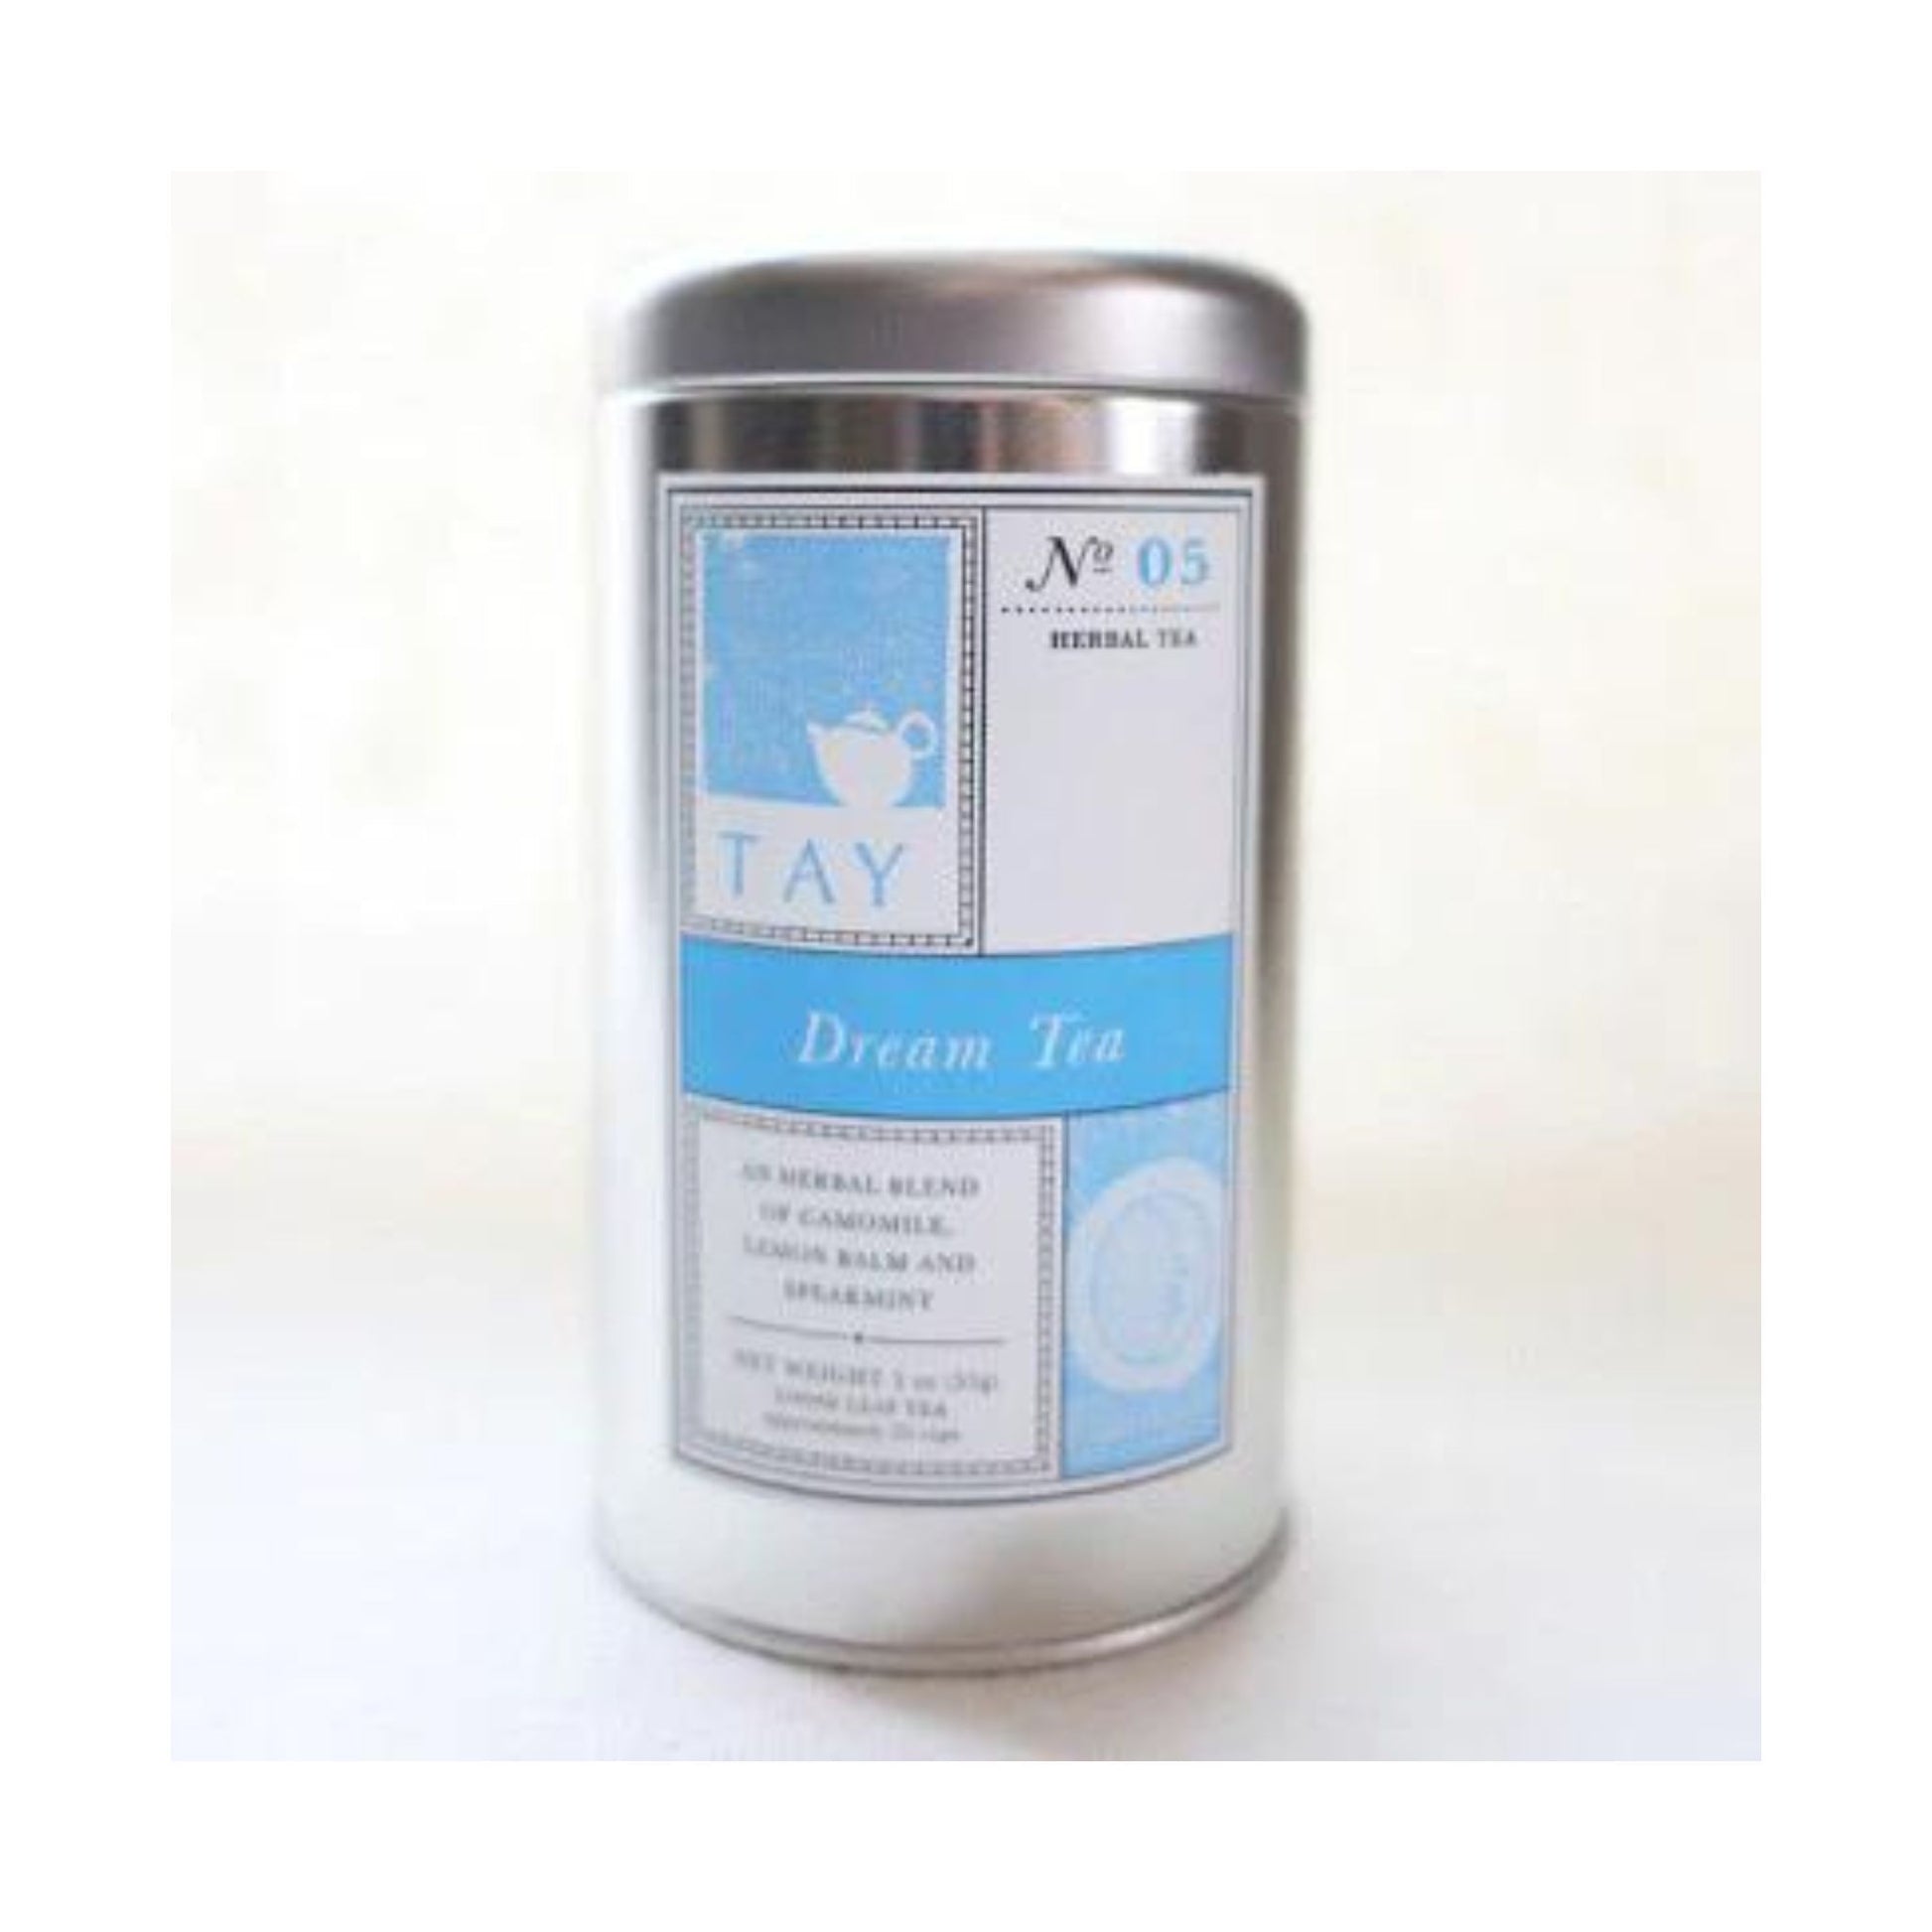 Dream Tea from Tay Tea made with chamomile, lemon balm and spearmint. 4 Oz. of loose tea is packaged in a resealable tin.